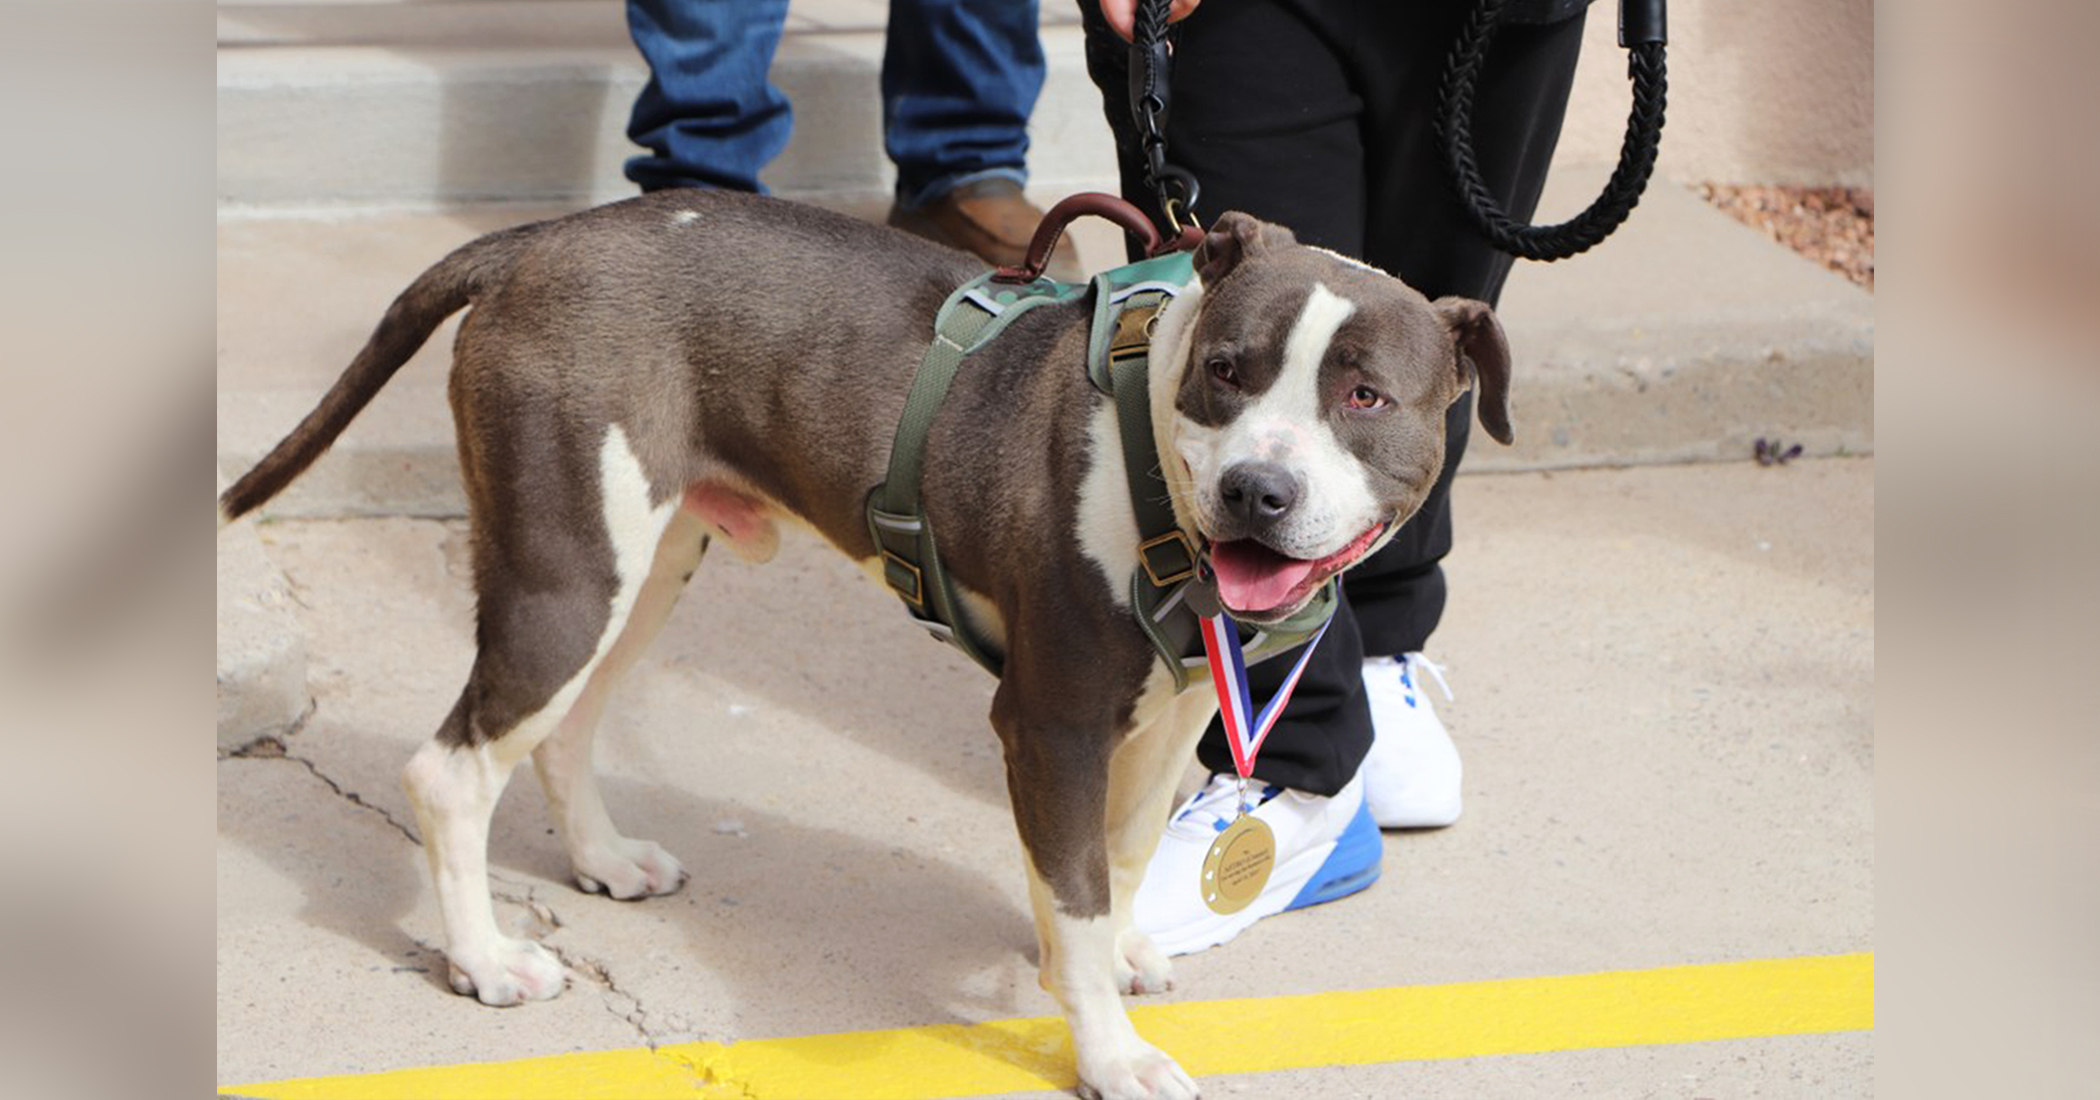 Former Stray Pit Bull Mix Receives Medal for Helping Save His Owner's Life